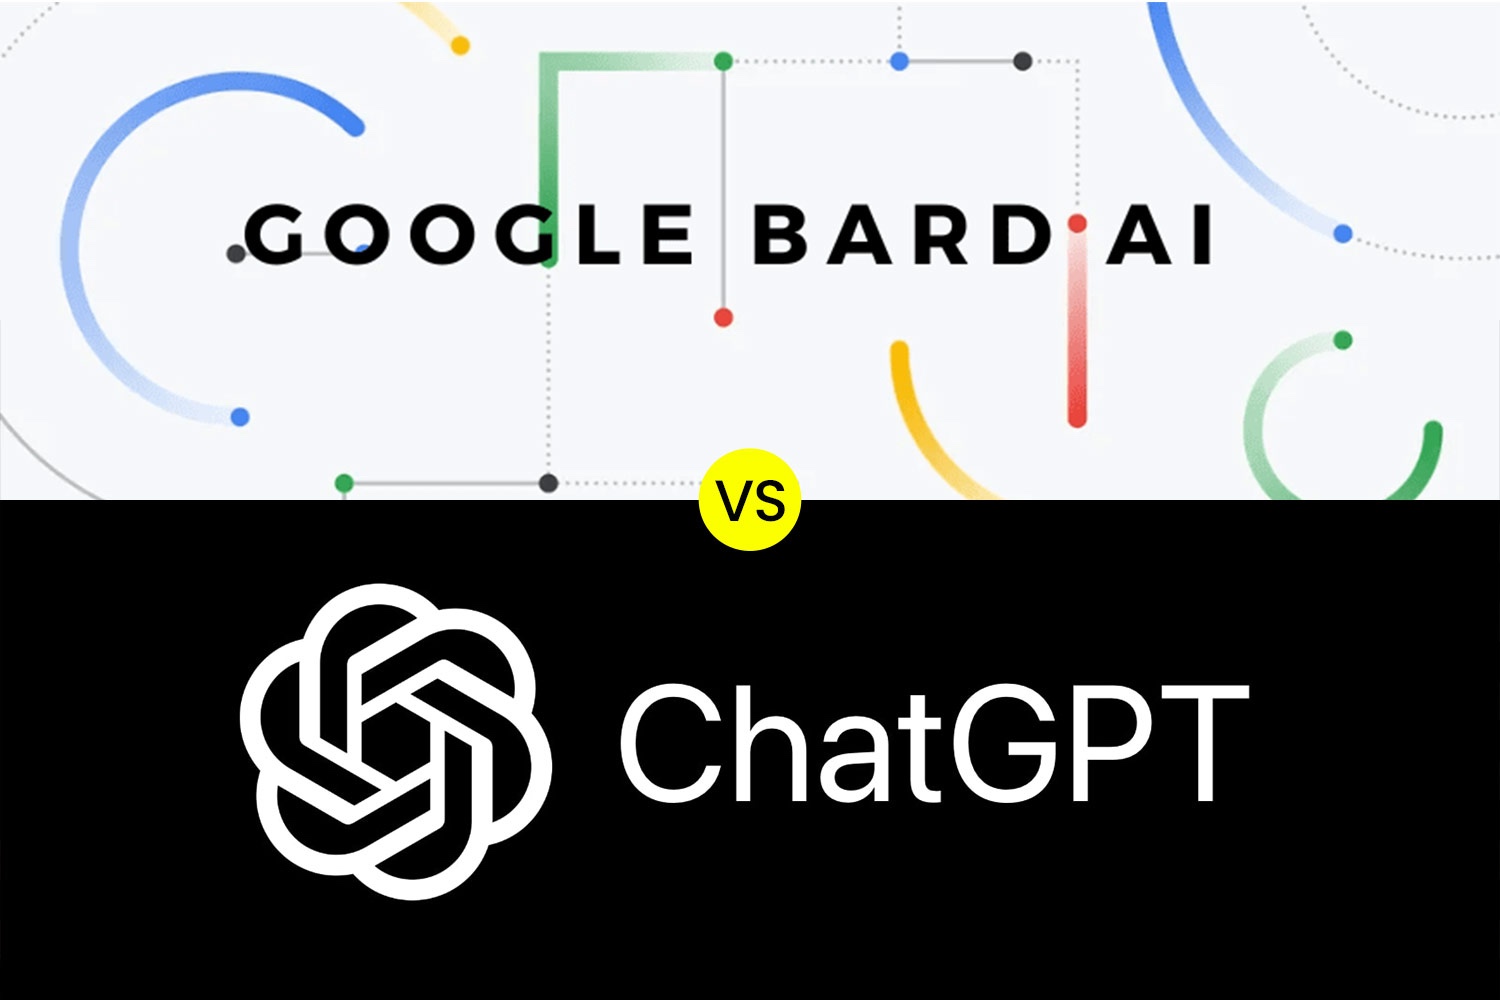 Google’s new AI, Bard. How does it compare to ChatGPT?